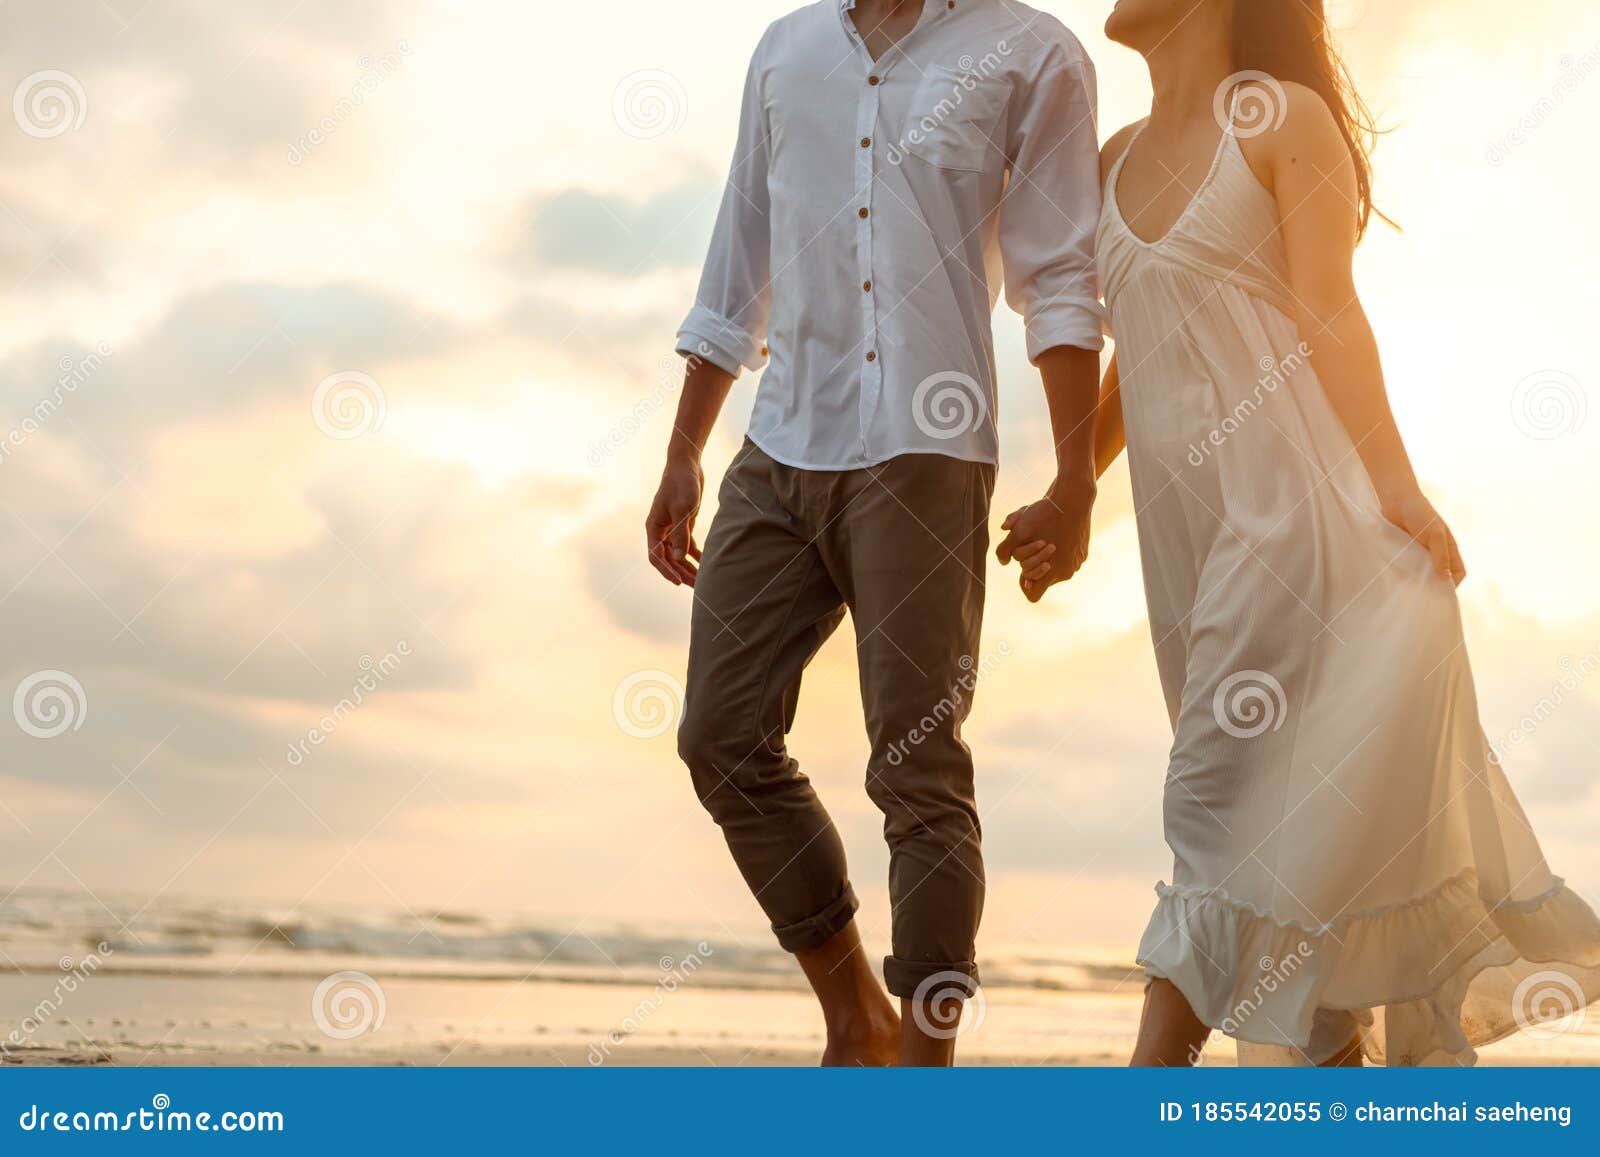 Romantic Couple Holding Hands and Walking on Beach. Man and Woman ...